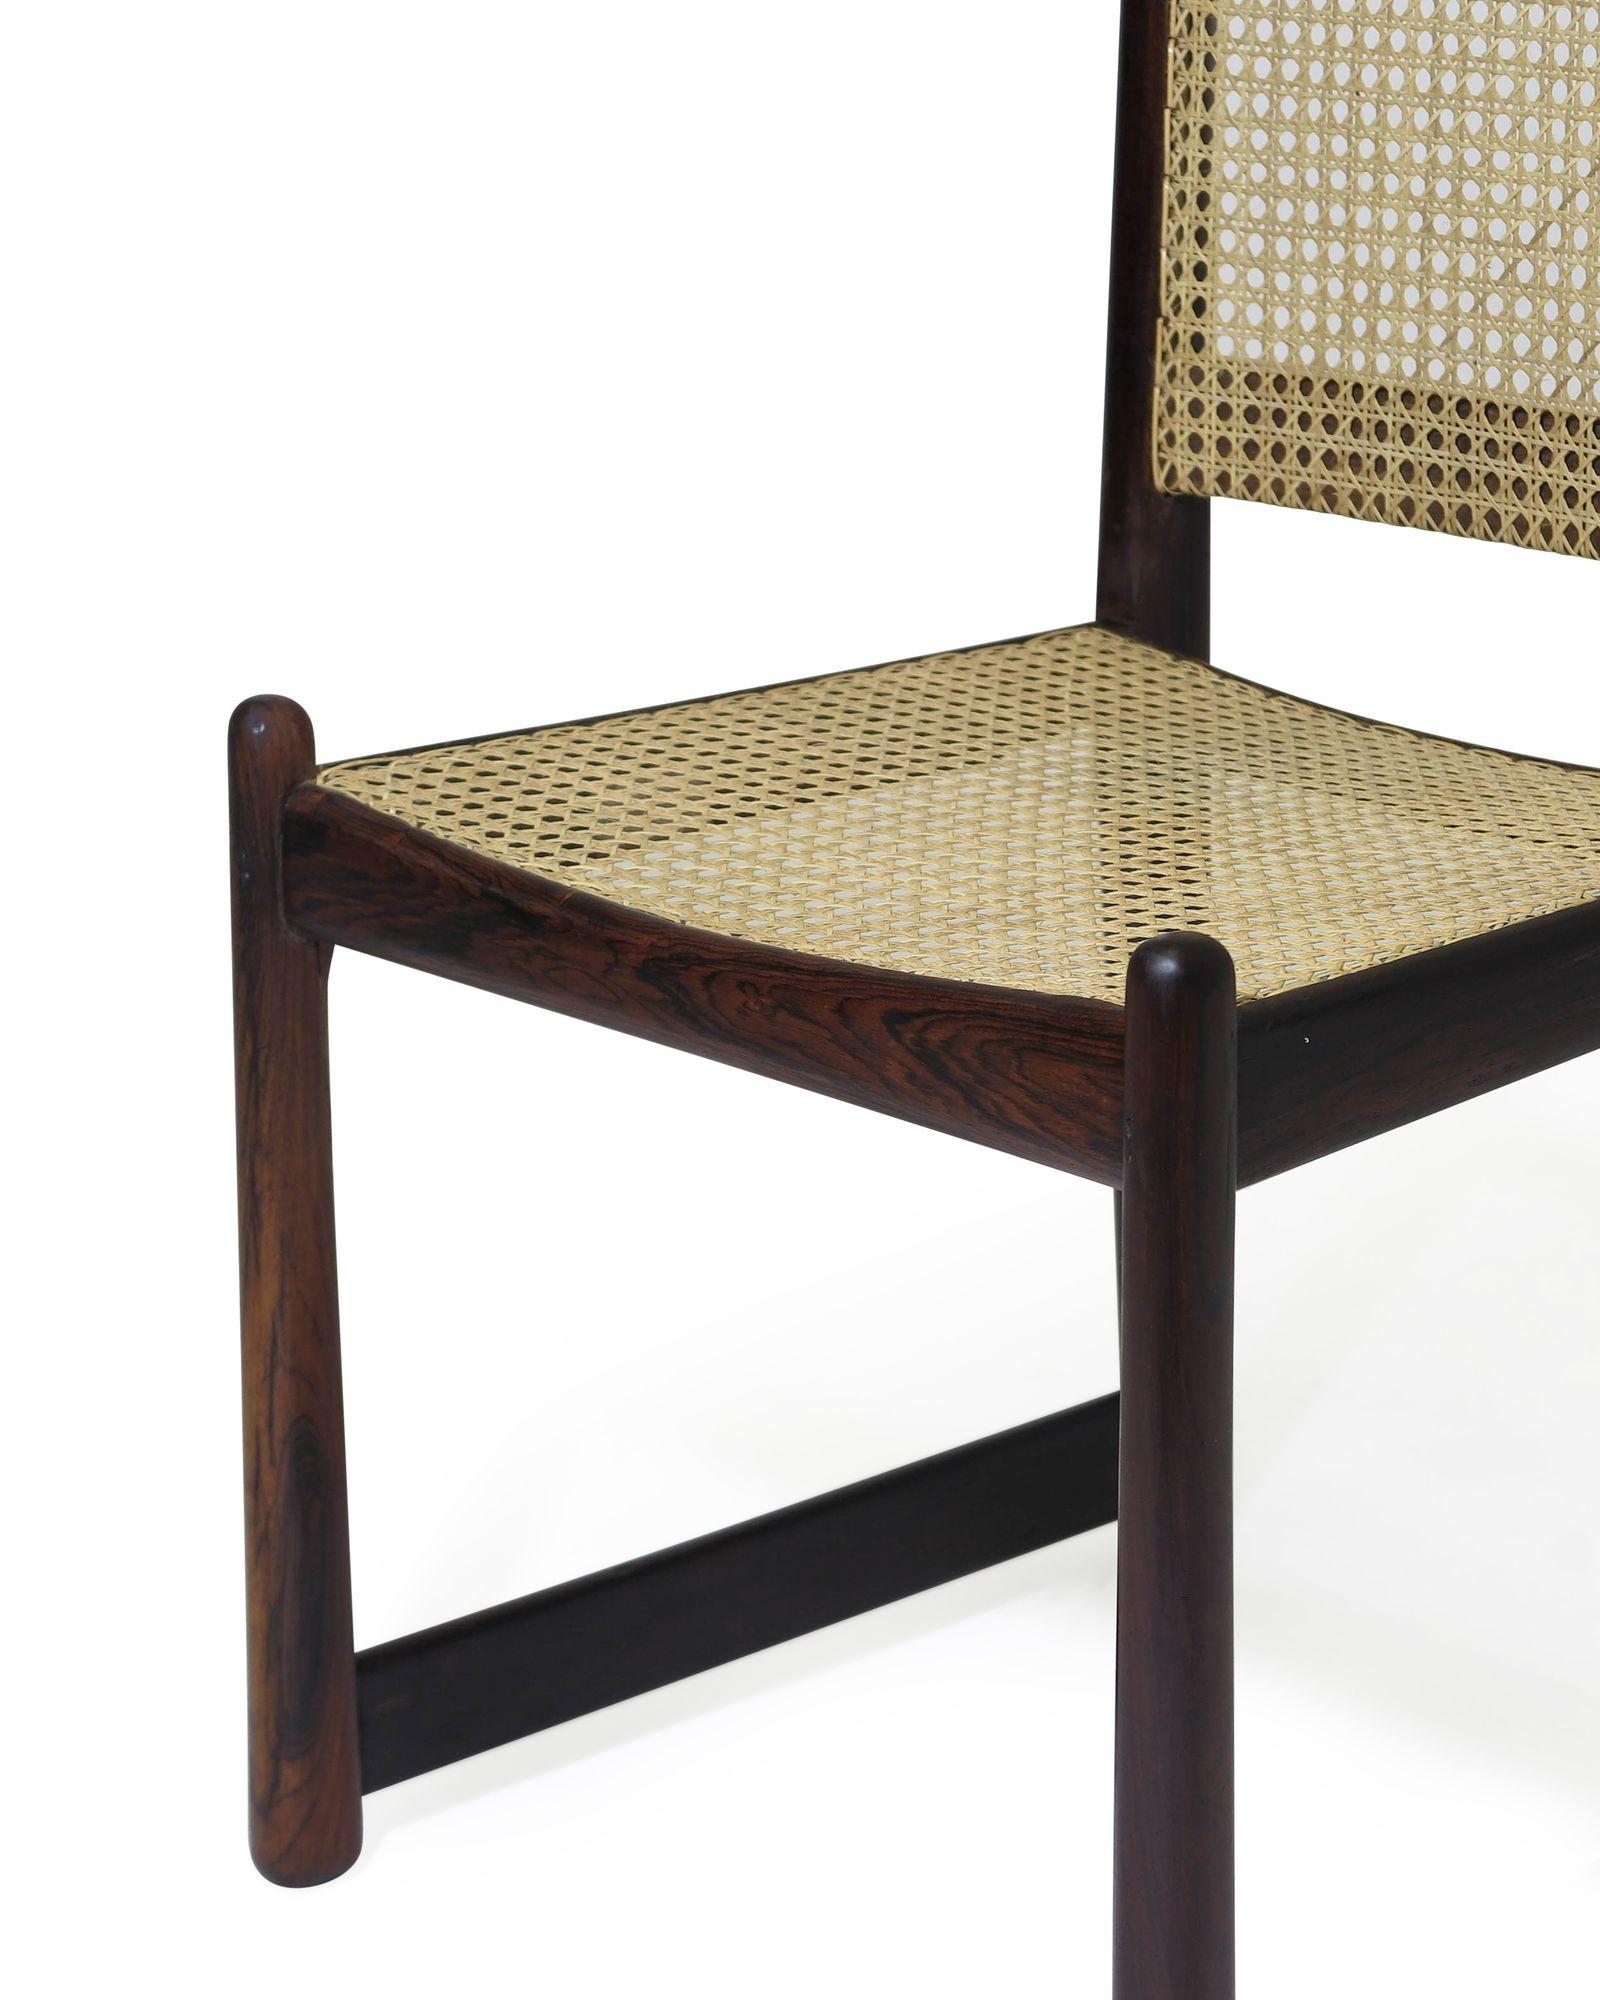 Highback Rosewood and Cane Dining Chairs In Good Condition For Sale In Oakland, CA